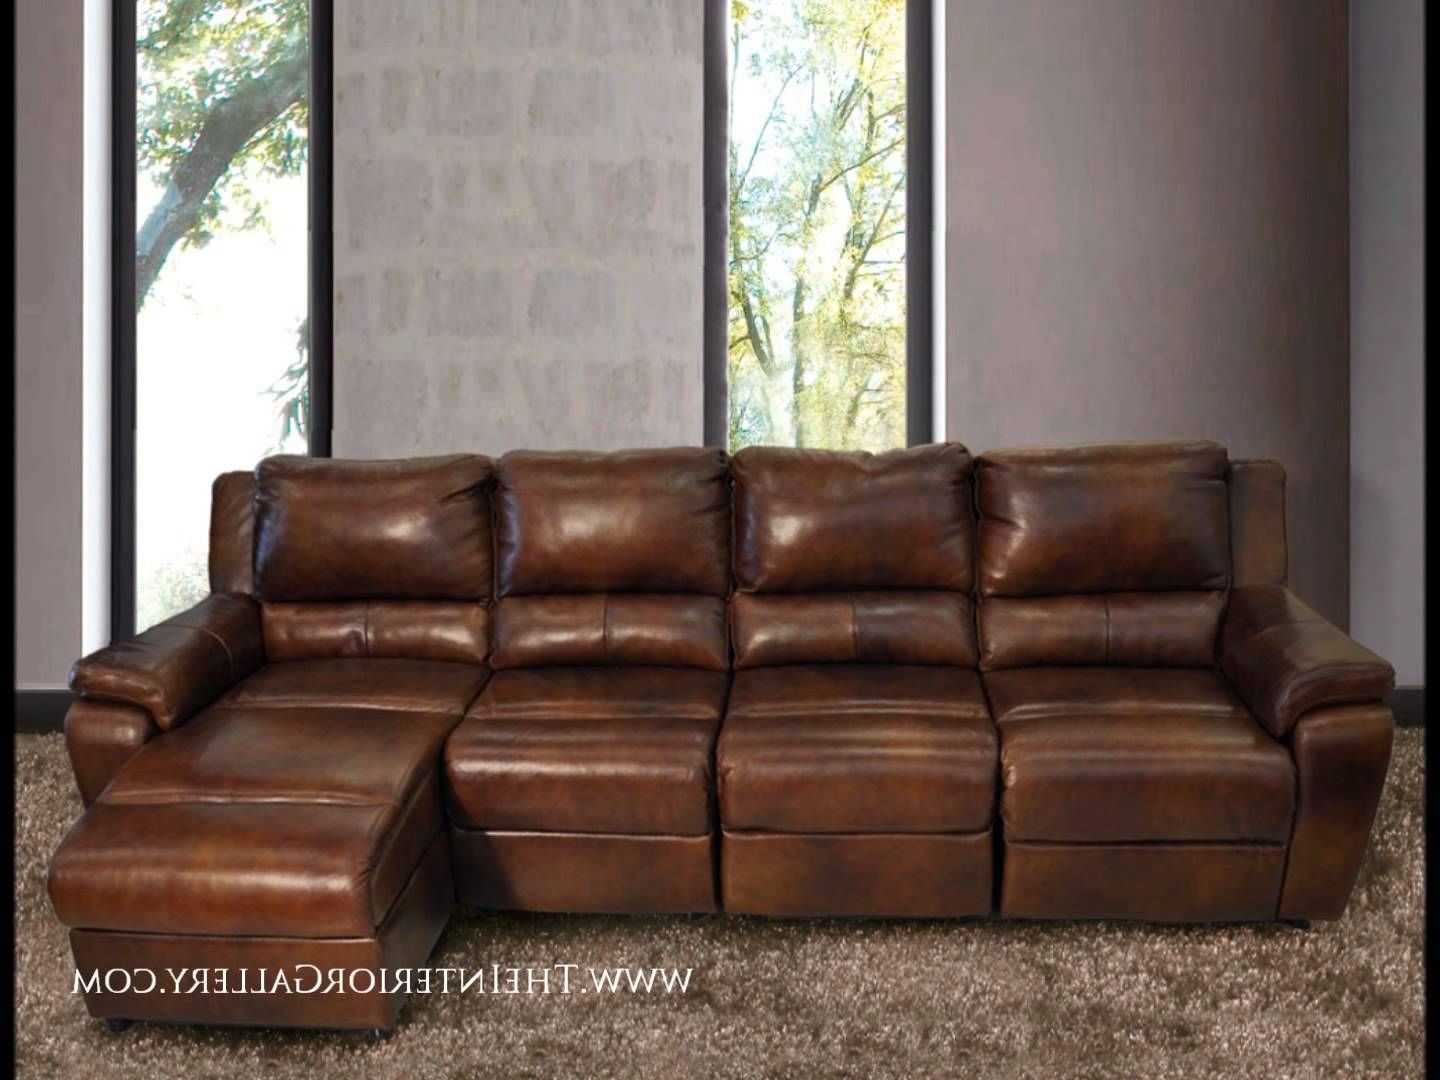 [%modern Leather Sofa Set Genuine 100% Leather – Youtube In Most Recently Released Genuine Leather Sectionals With Chaise|genuine Leather Sectionals With Chaise With Regard To Favorite Modern Leather Sofa Set Genuine 100% Leather – Youtube|trendy Genuine Leather Sectionals With Chaise Regarding Modern Leather Sofa Set Genuine 100% Leather – Youtube|fashionable Modern Leather Sofa Set Genuine 100% Leather – Youtube Inside Genuine Leather Sectionals With Chaise%] (View 15 of 15)